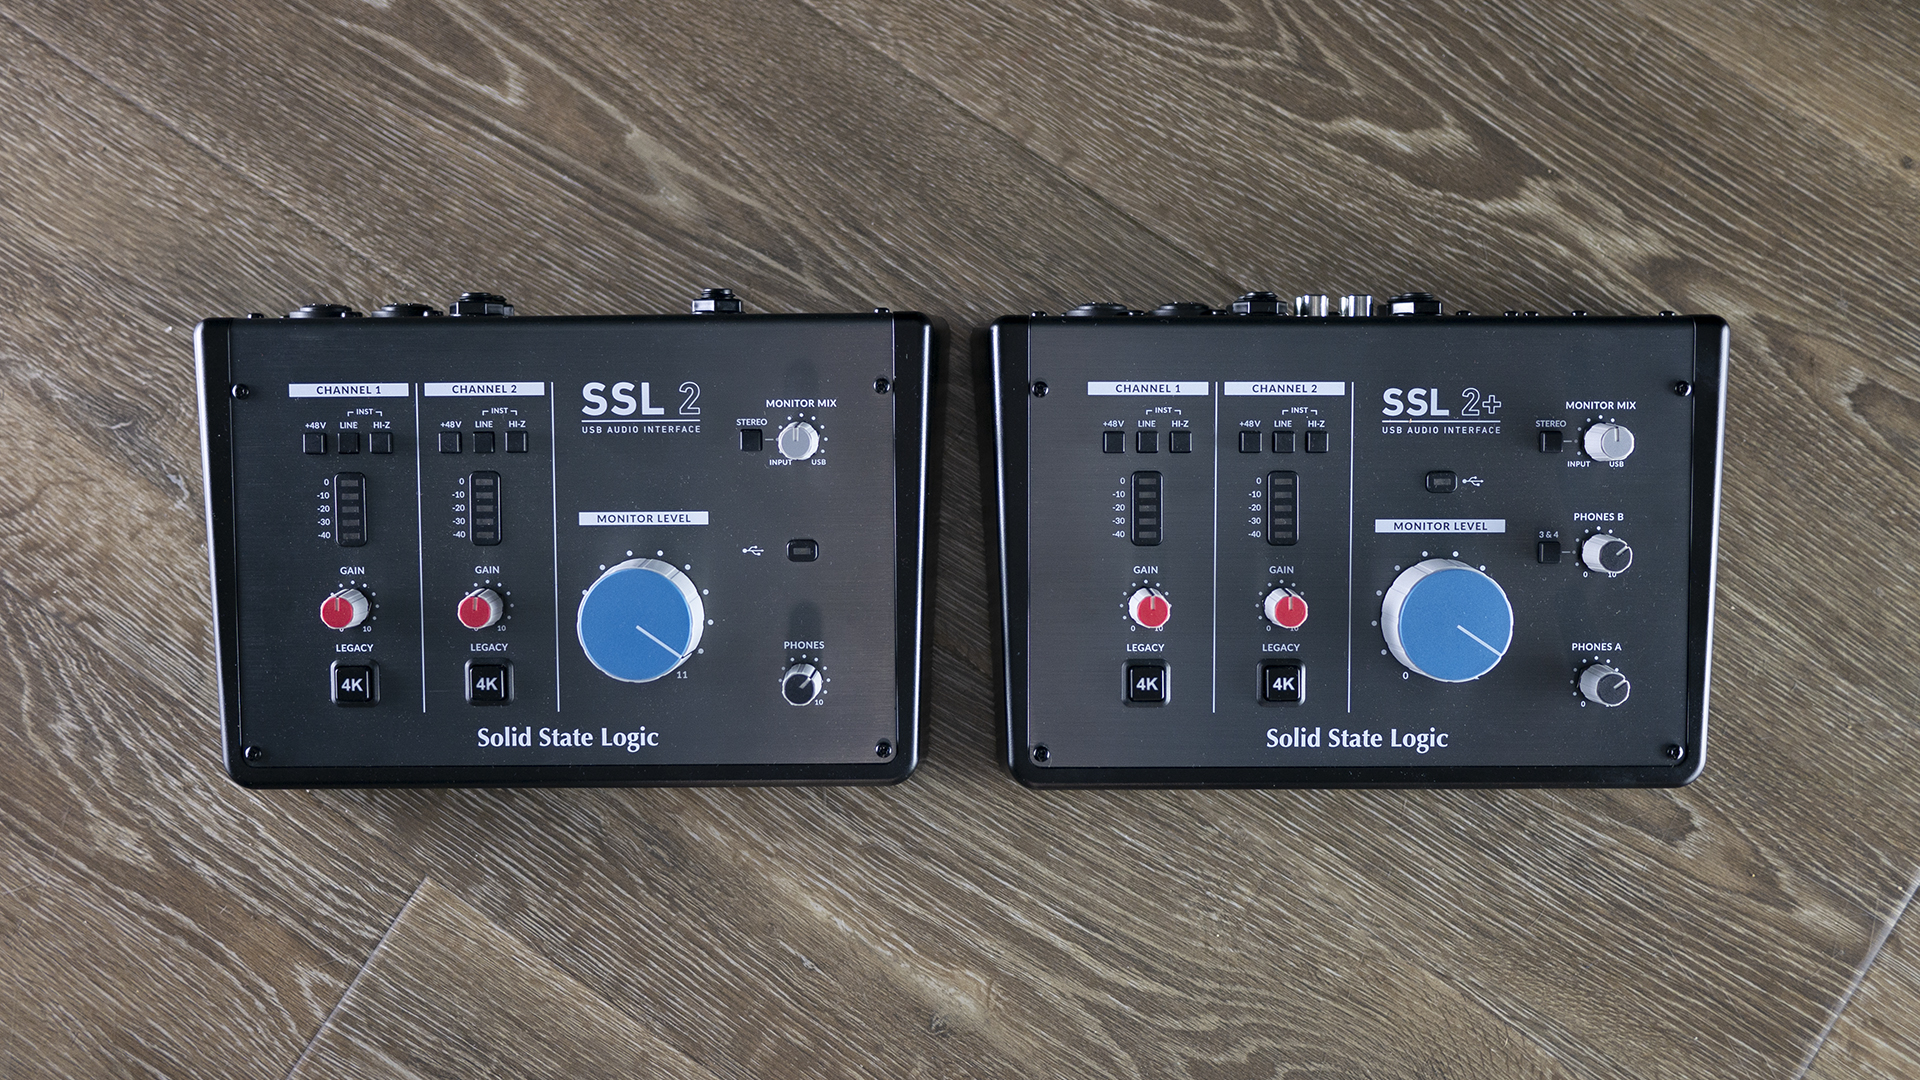 Our Guide to the SSL 2 & SSL 2+